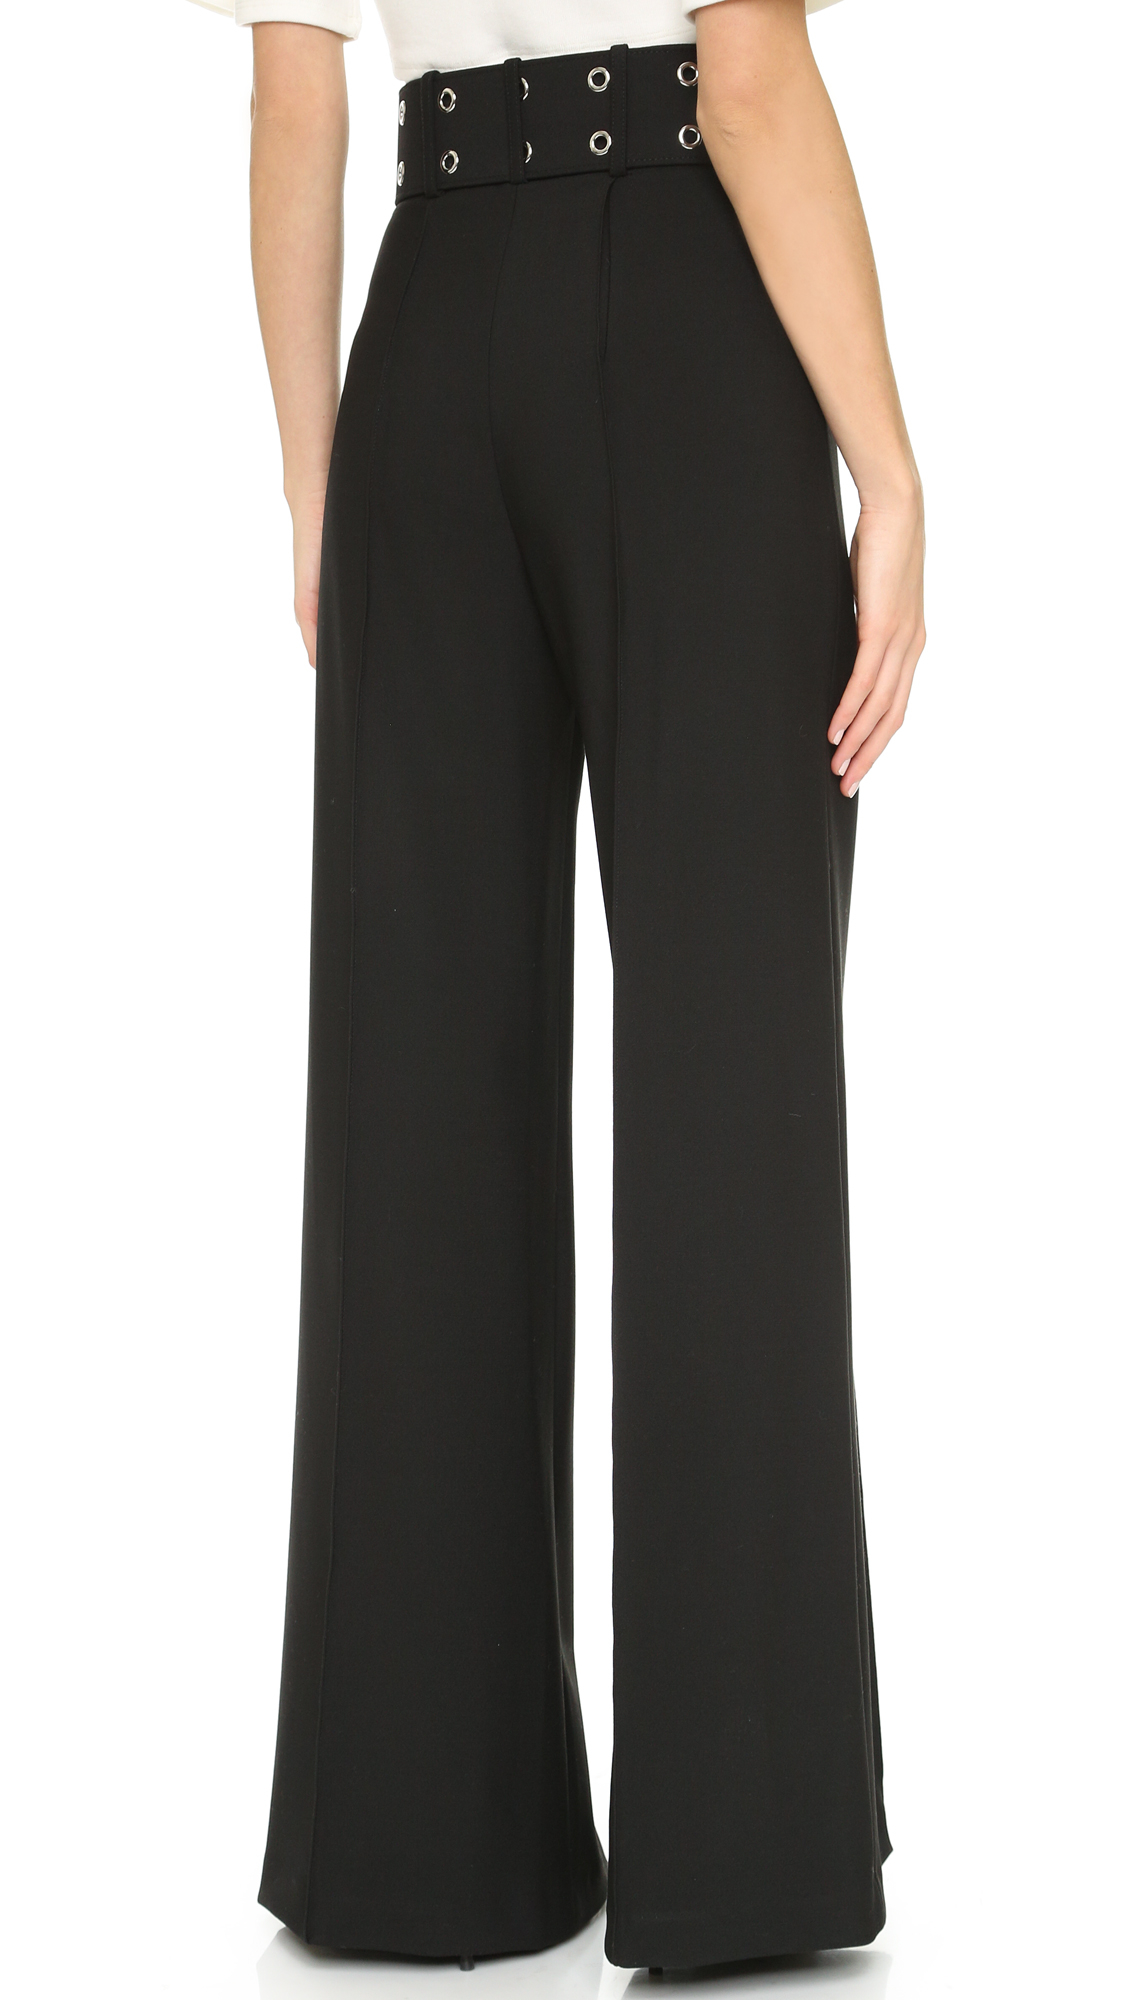 MILLY Synthetic Wide Leg Pants in Black - Lyst